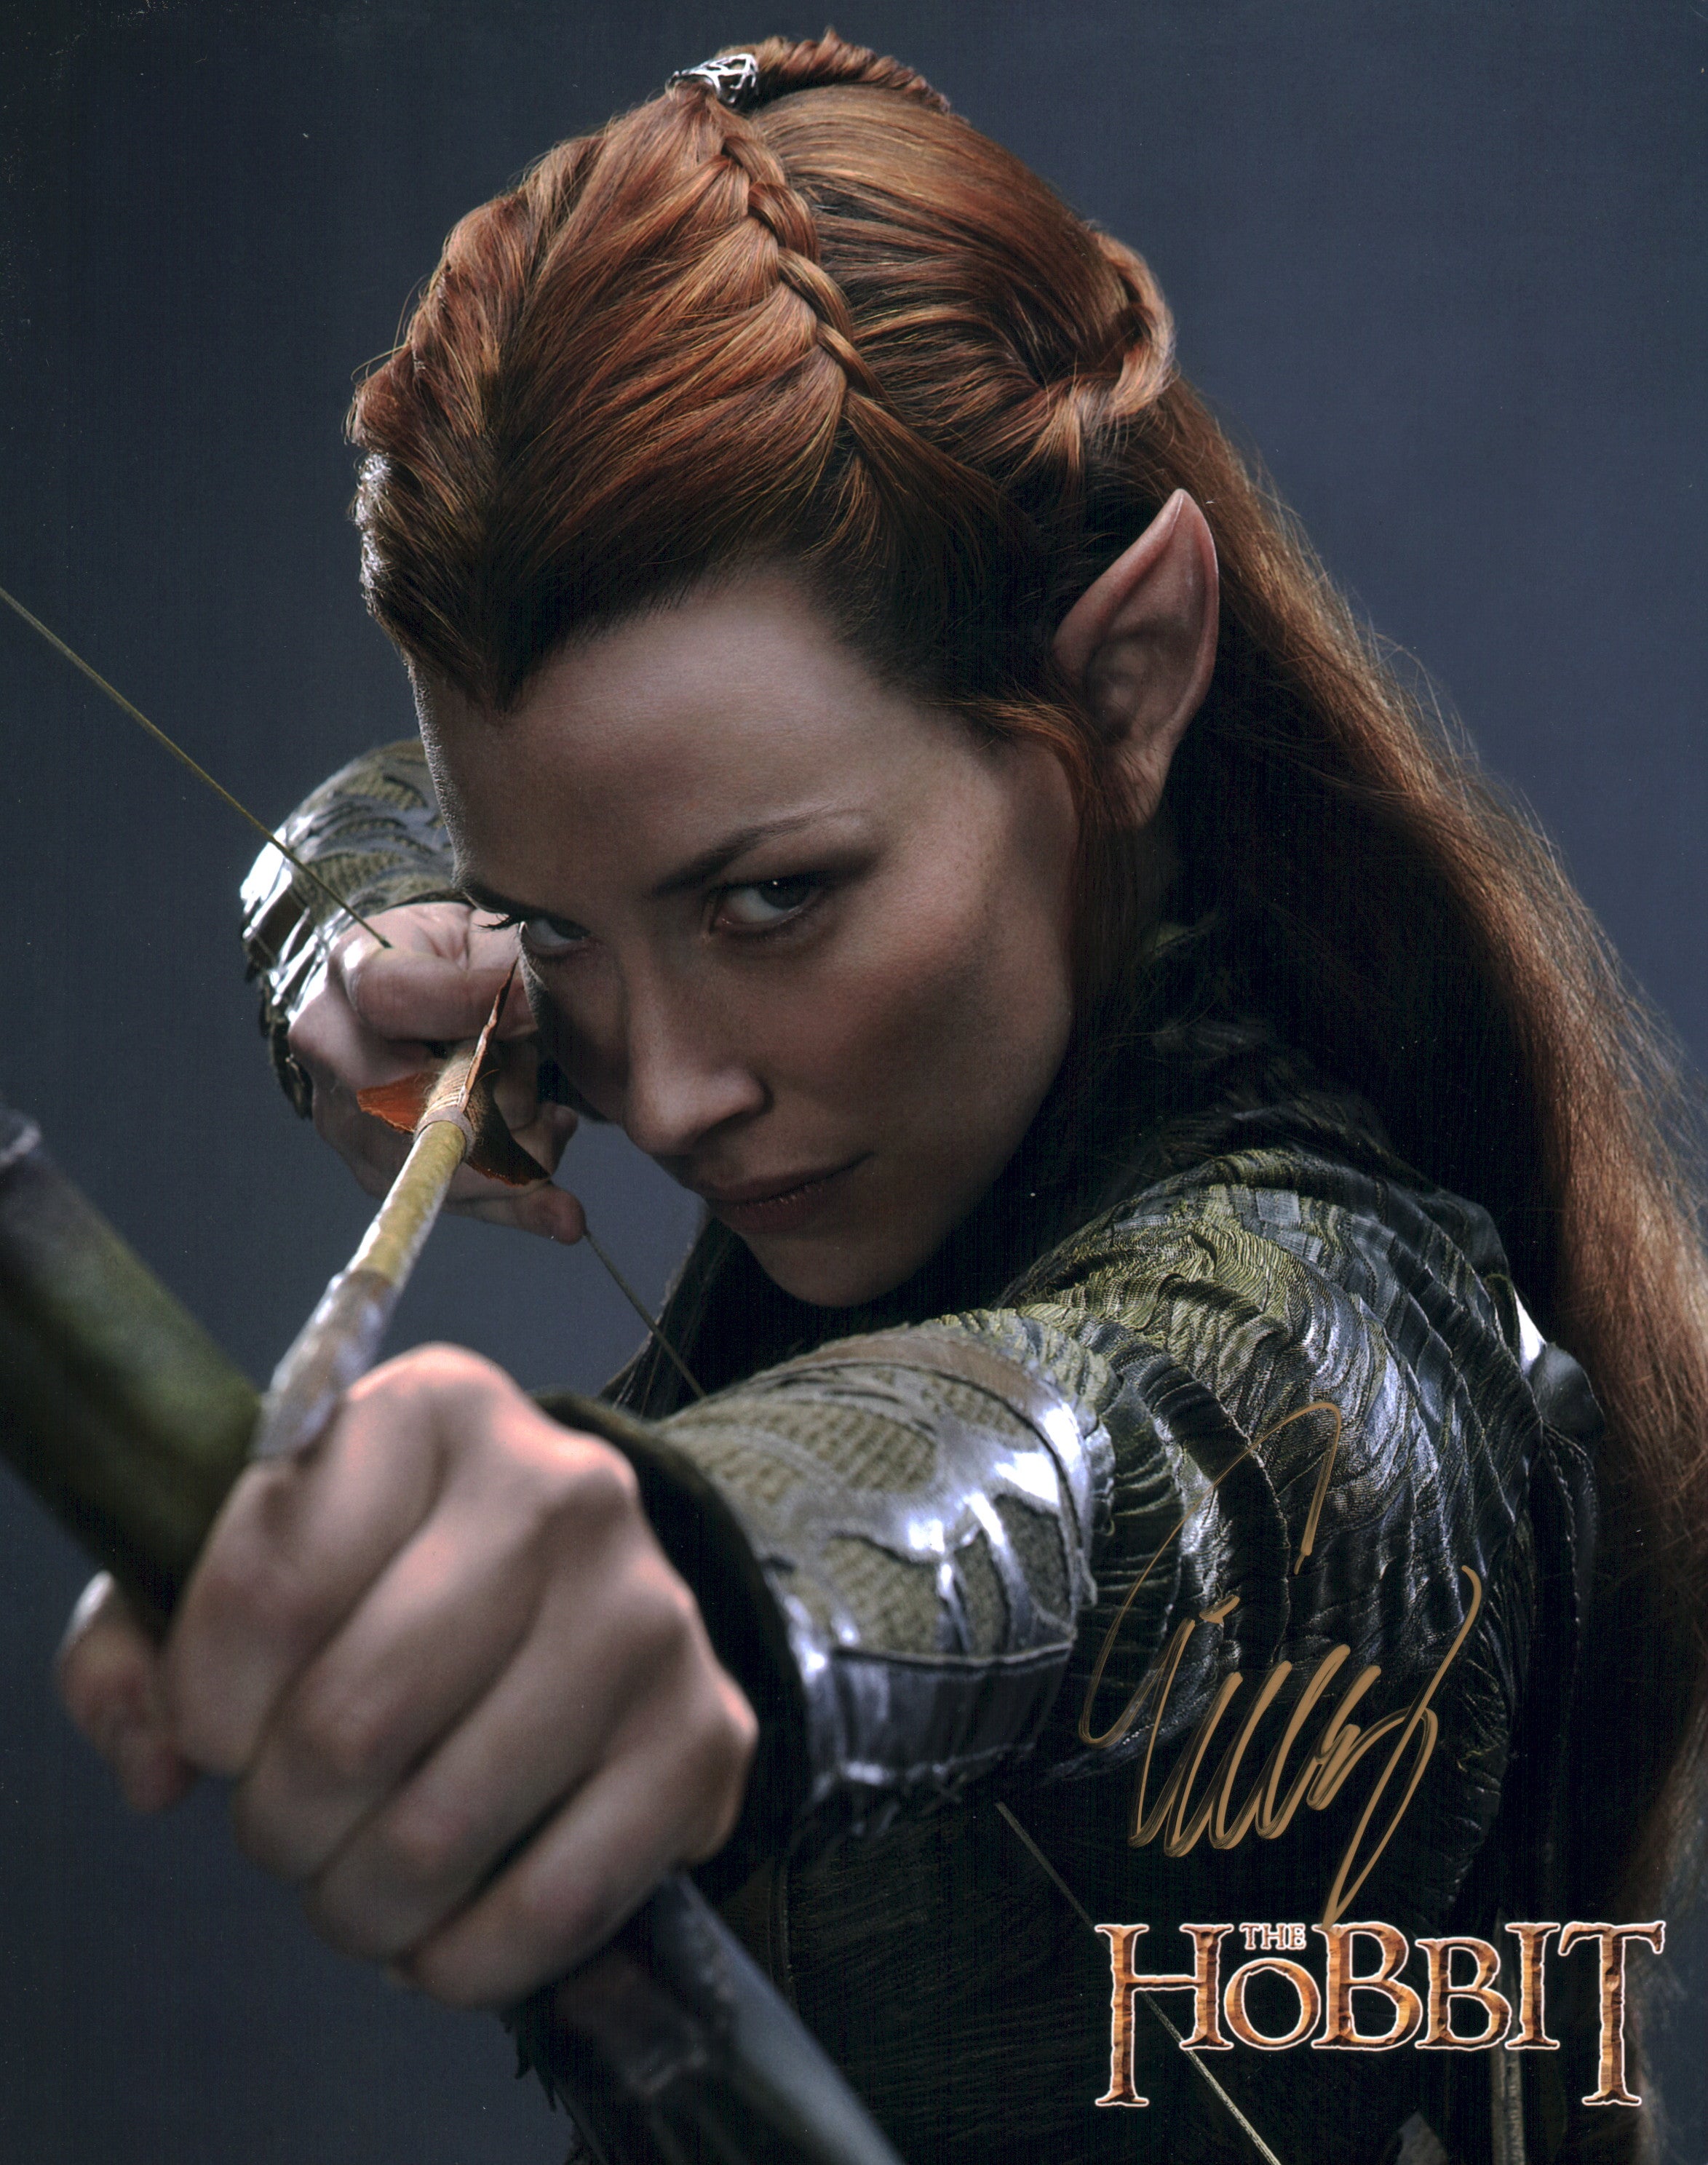 Evangeline Lilly The Hobbit 8x10 Signed Photo JSA Certified Autograph